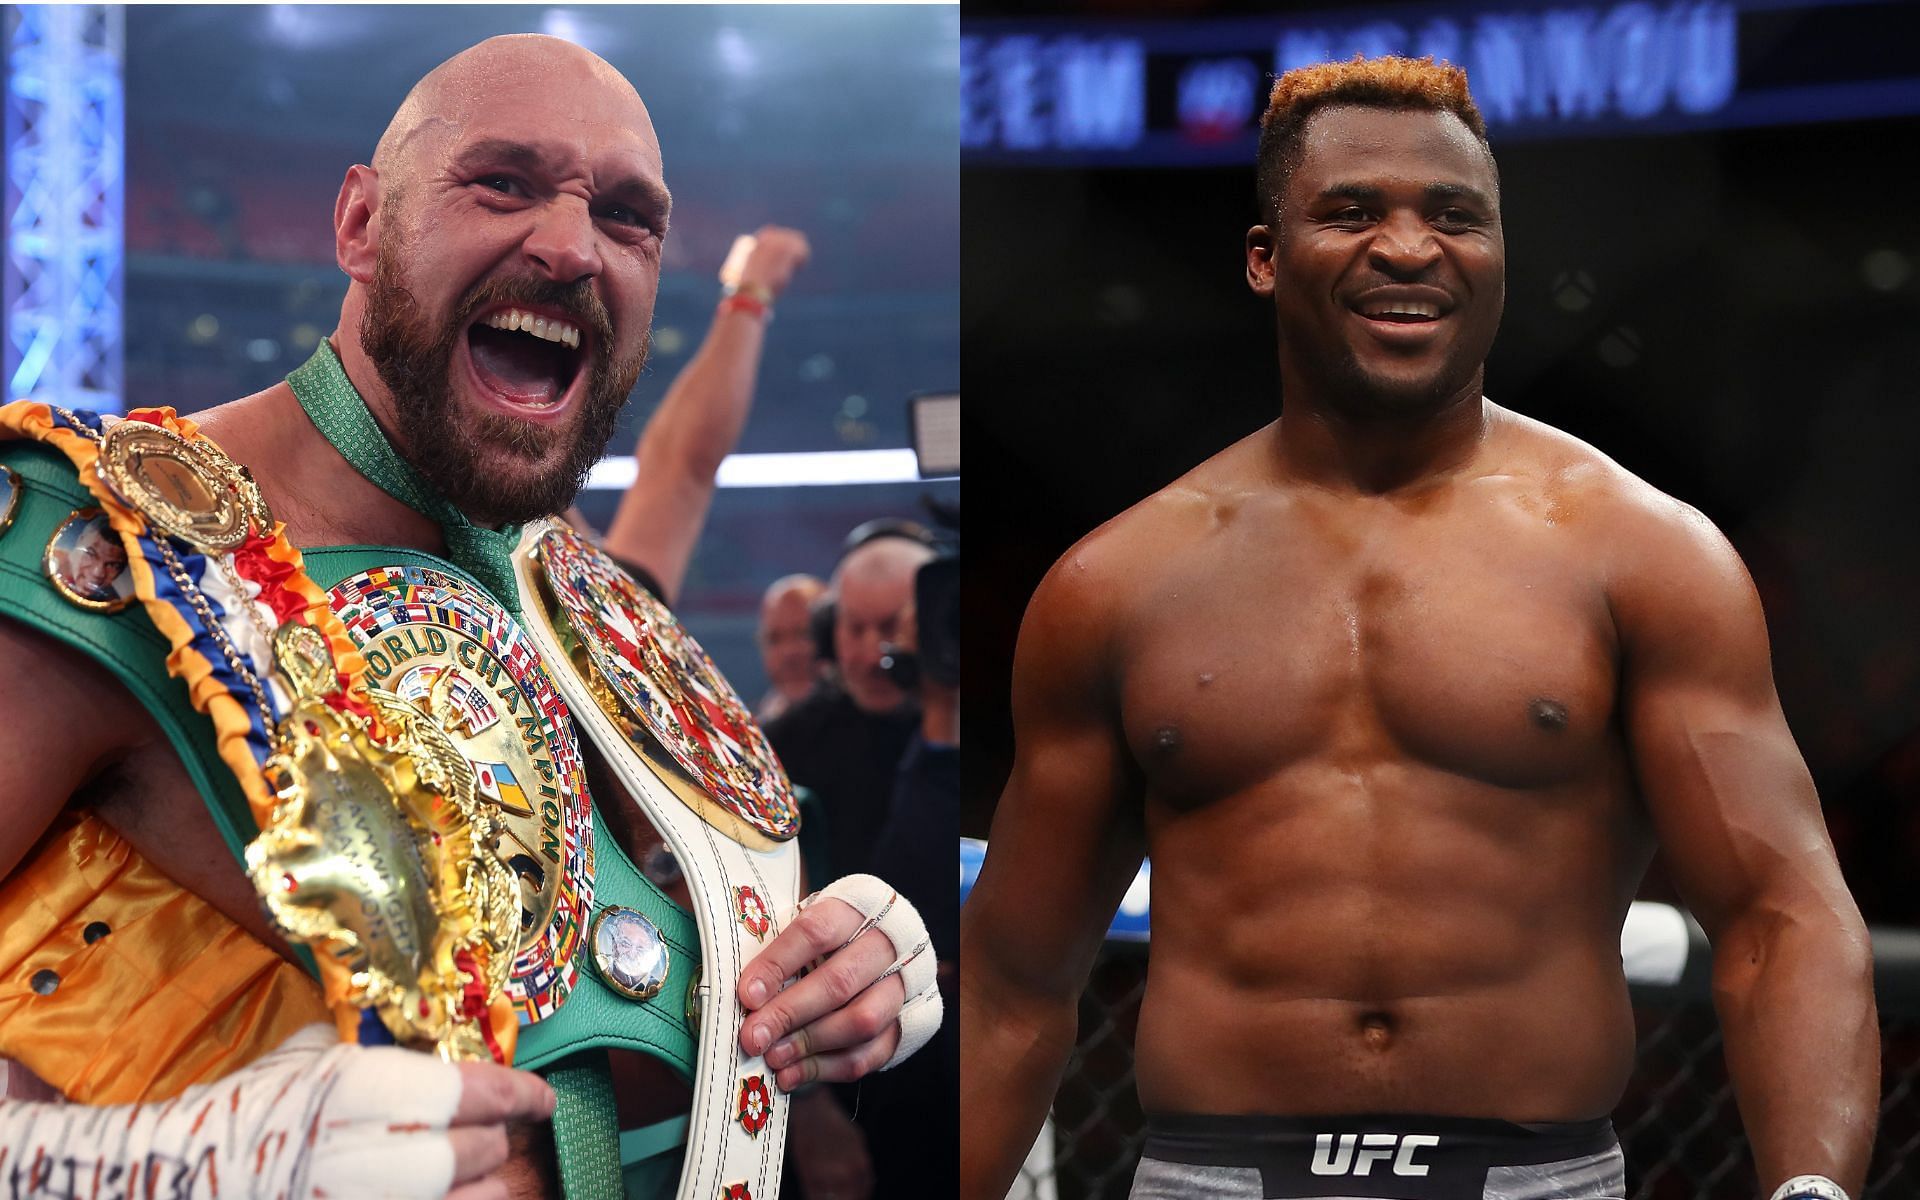 Tyson Fury (left) and Francis Ngannou (right) (Image credits Getty Images)